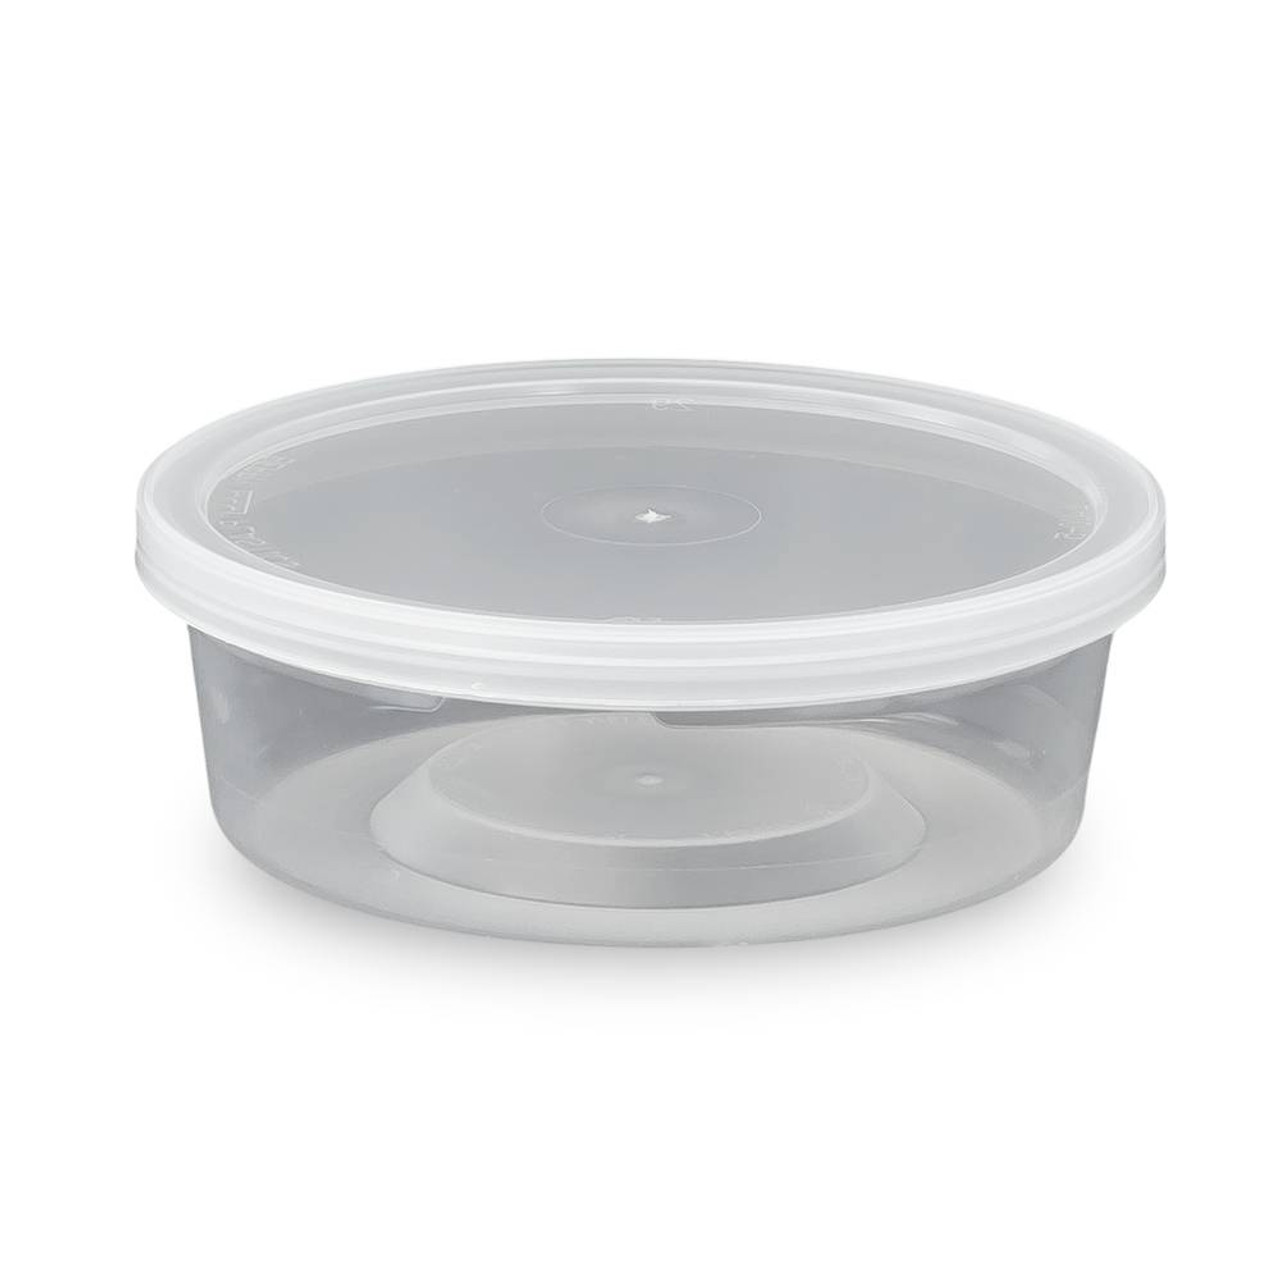 Shop 8 oz Deli Containers - 500 ct at Low Price with Fast Shipping